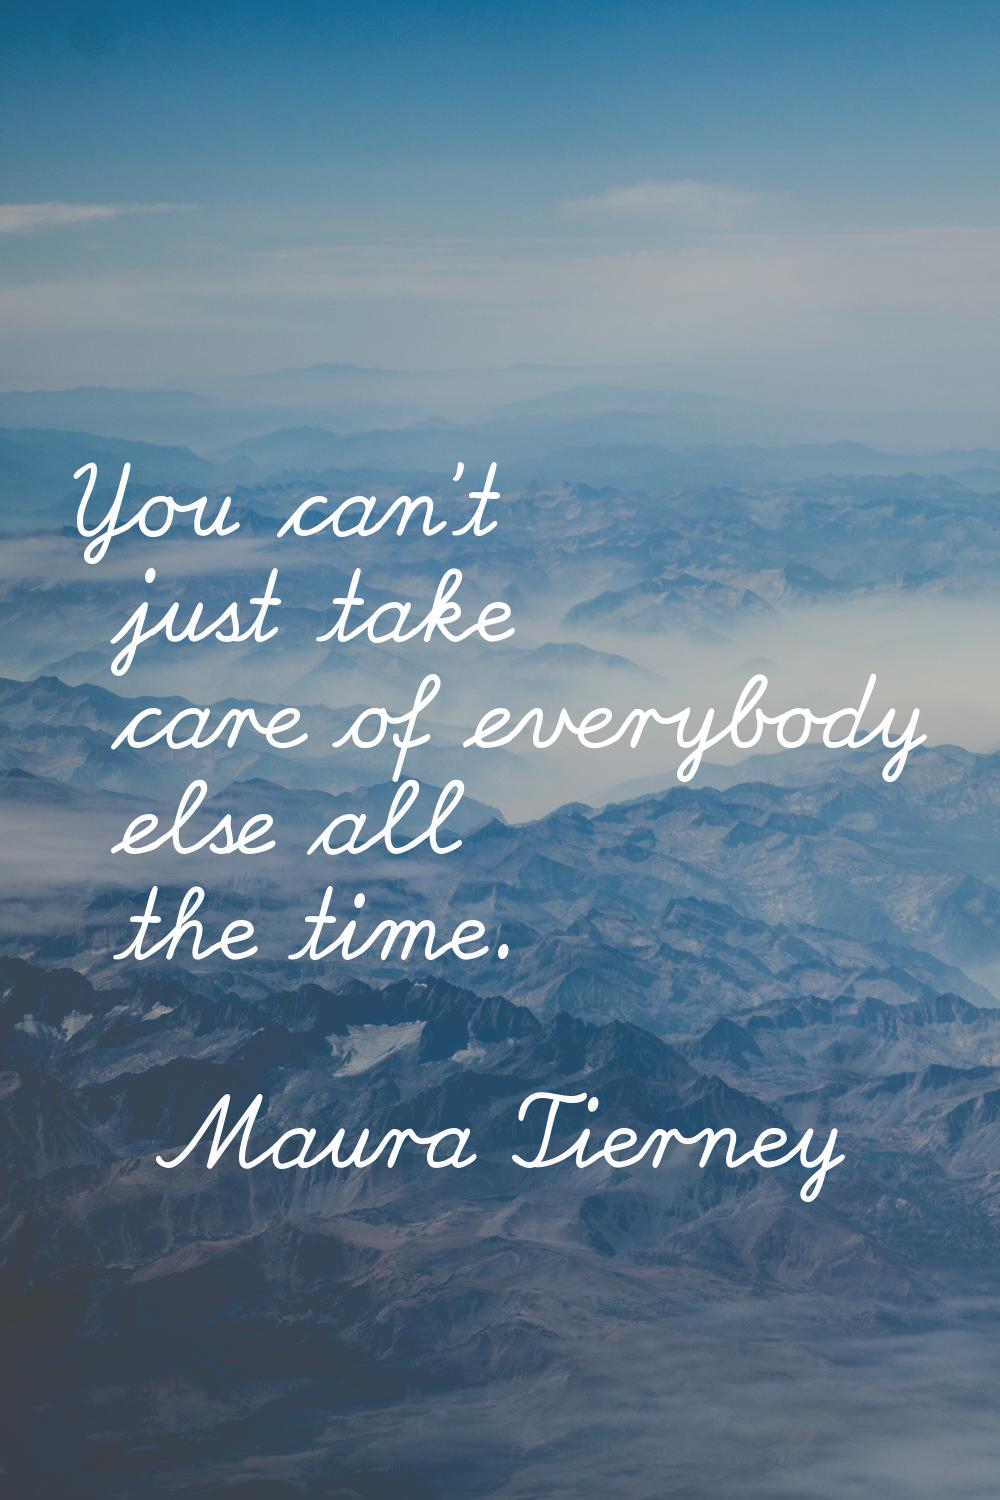 You can't just take care of everybody else all the time.